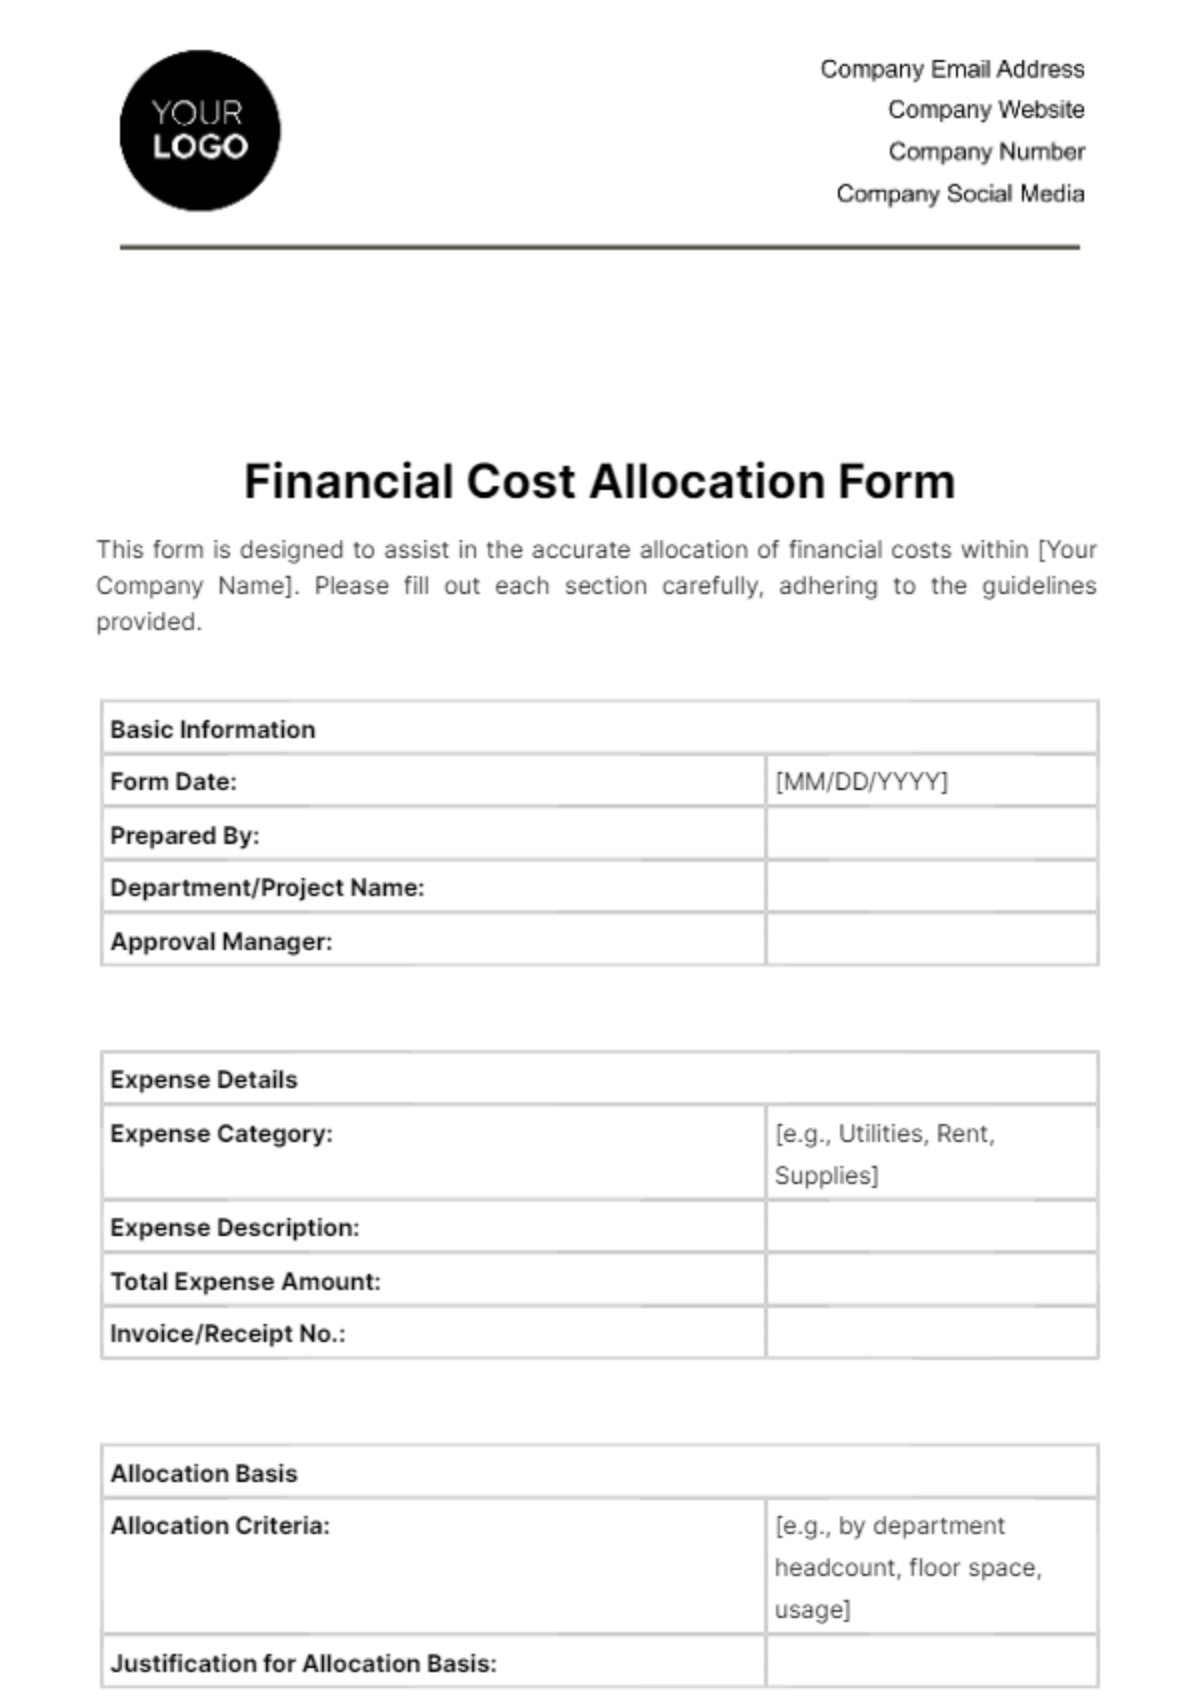 Financial Cost Allocation Form Template